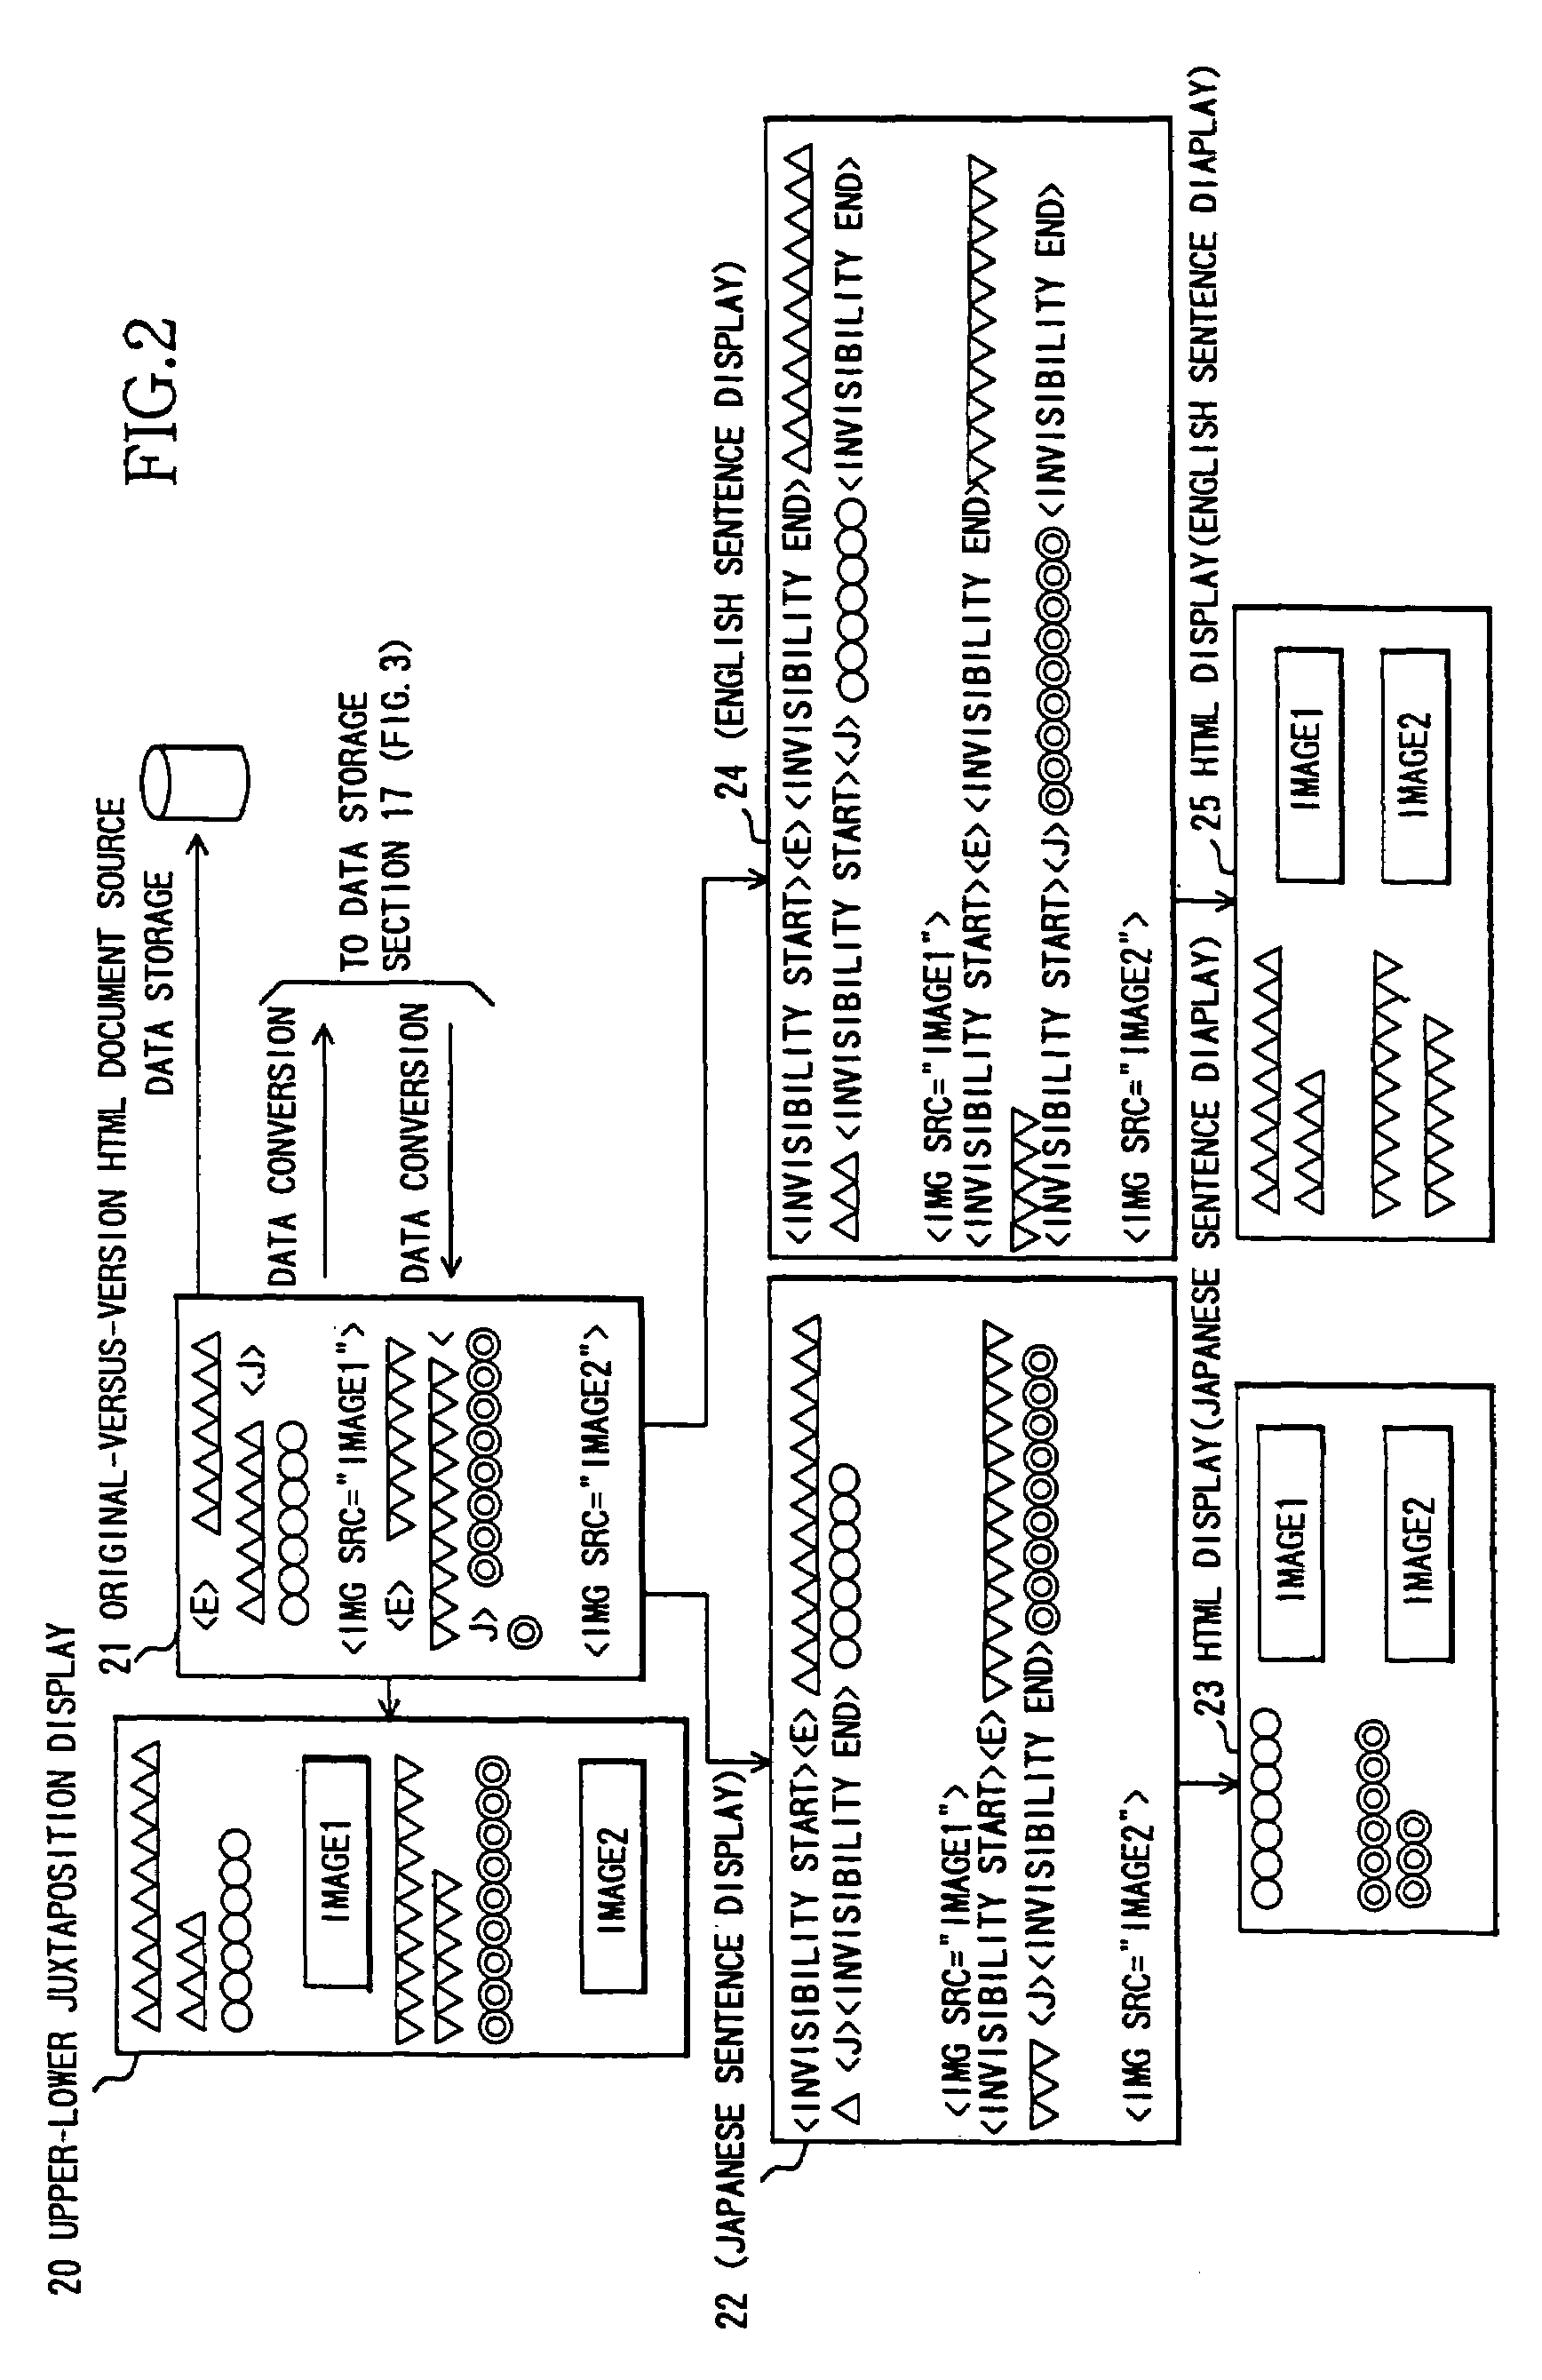 Document processing apparatus and method for analysis and formation of tagged hypertext documents